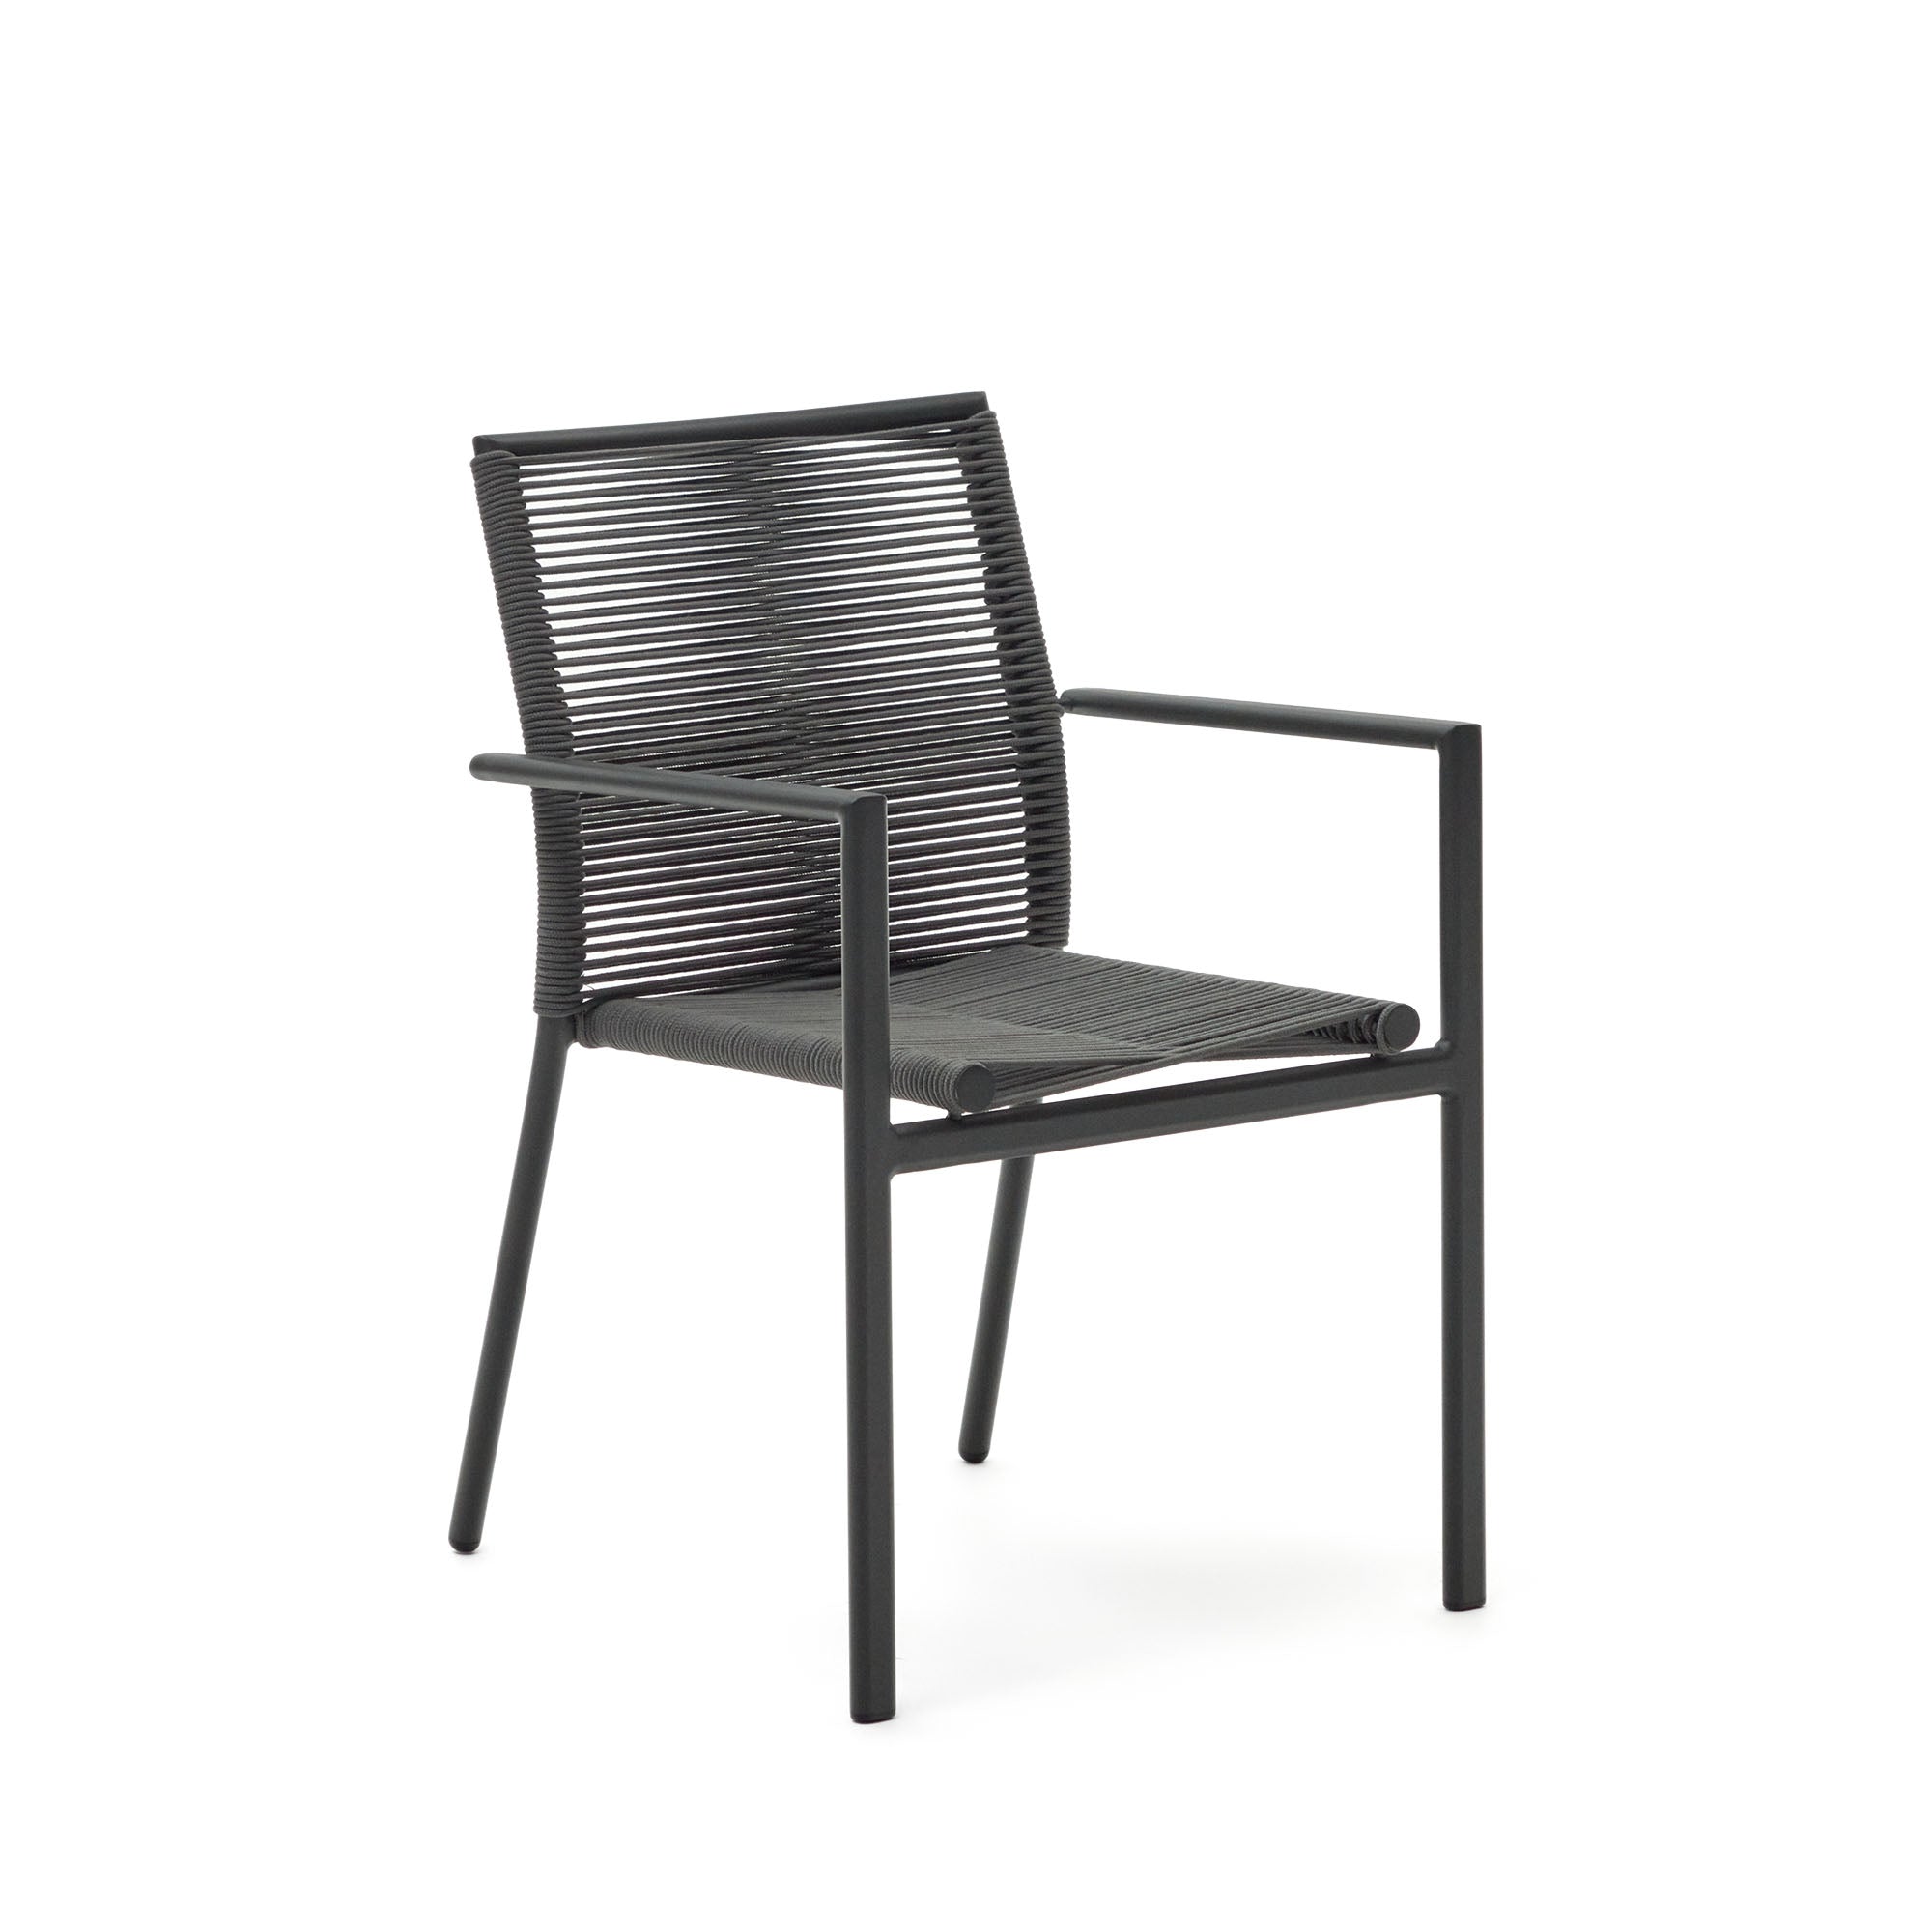 Culip aluminium and cord stackable outdoor chair in grey